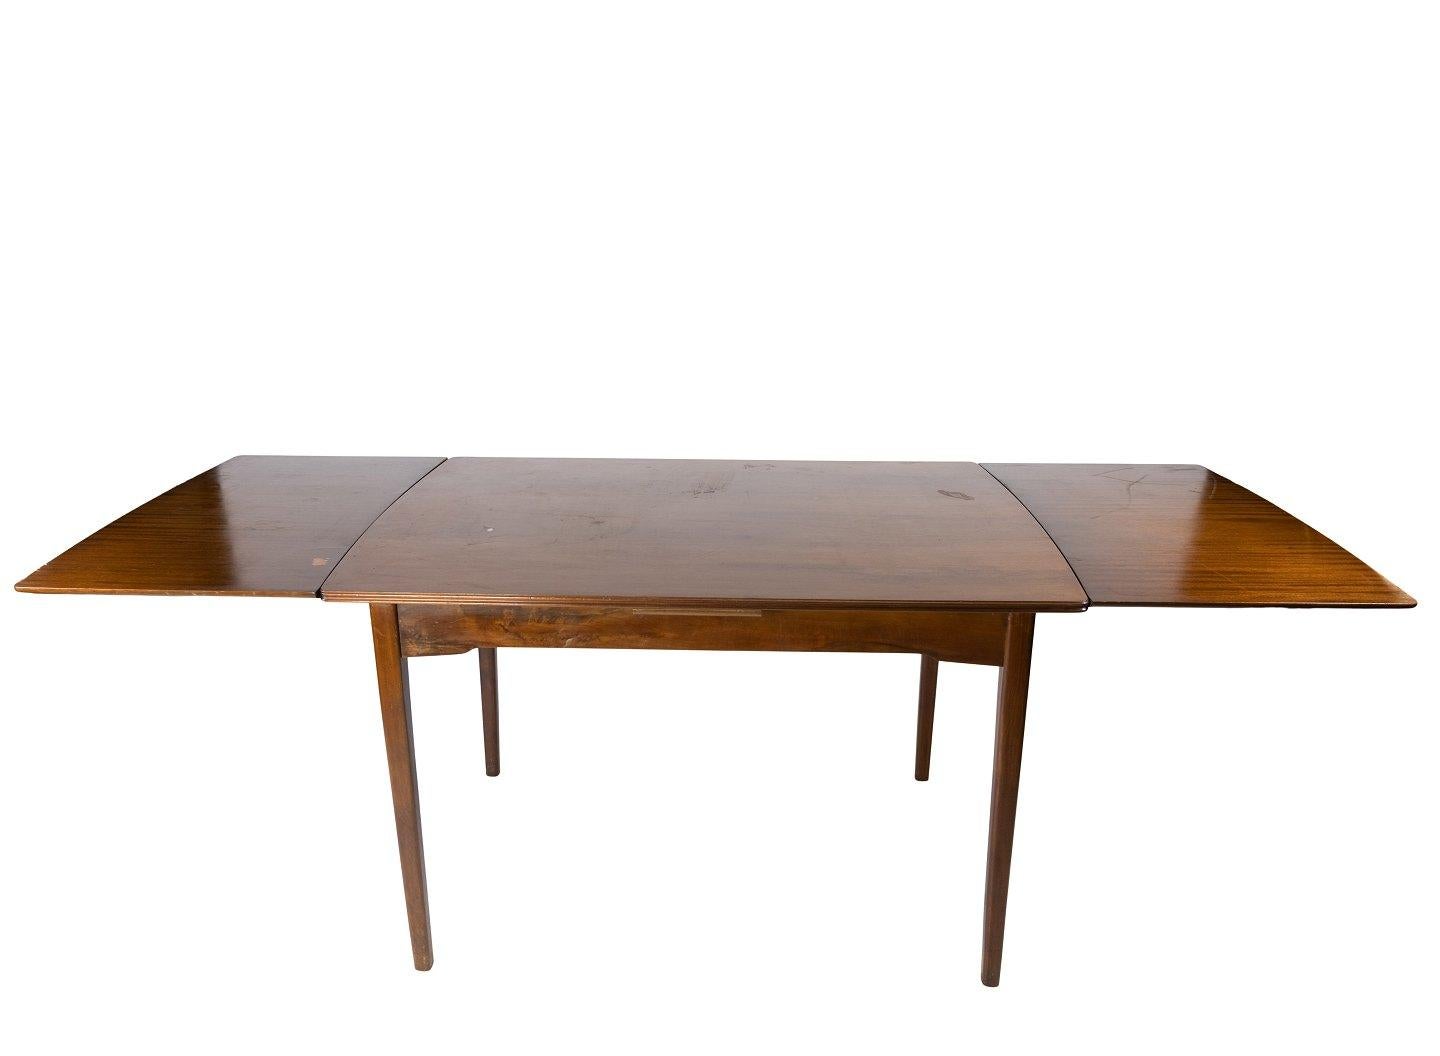 This Danish-designed dining table from the 1960s epitomizes the elegant simplicity and functional beauty characteristic of mid-century modern design. Crafted from rich walnut, prized for its natural warmth and distinctive grain patterns, this table